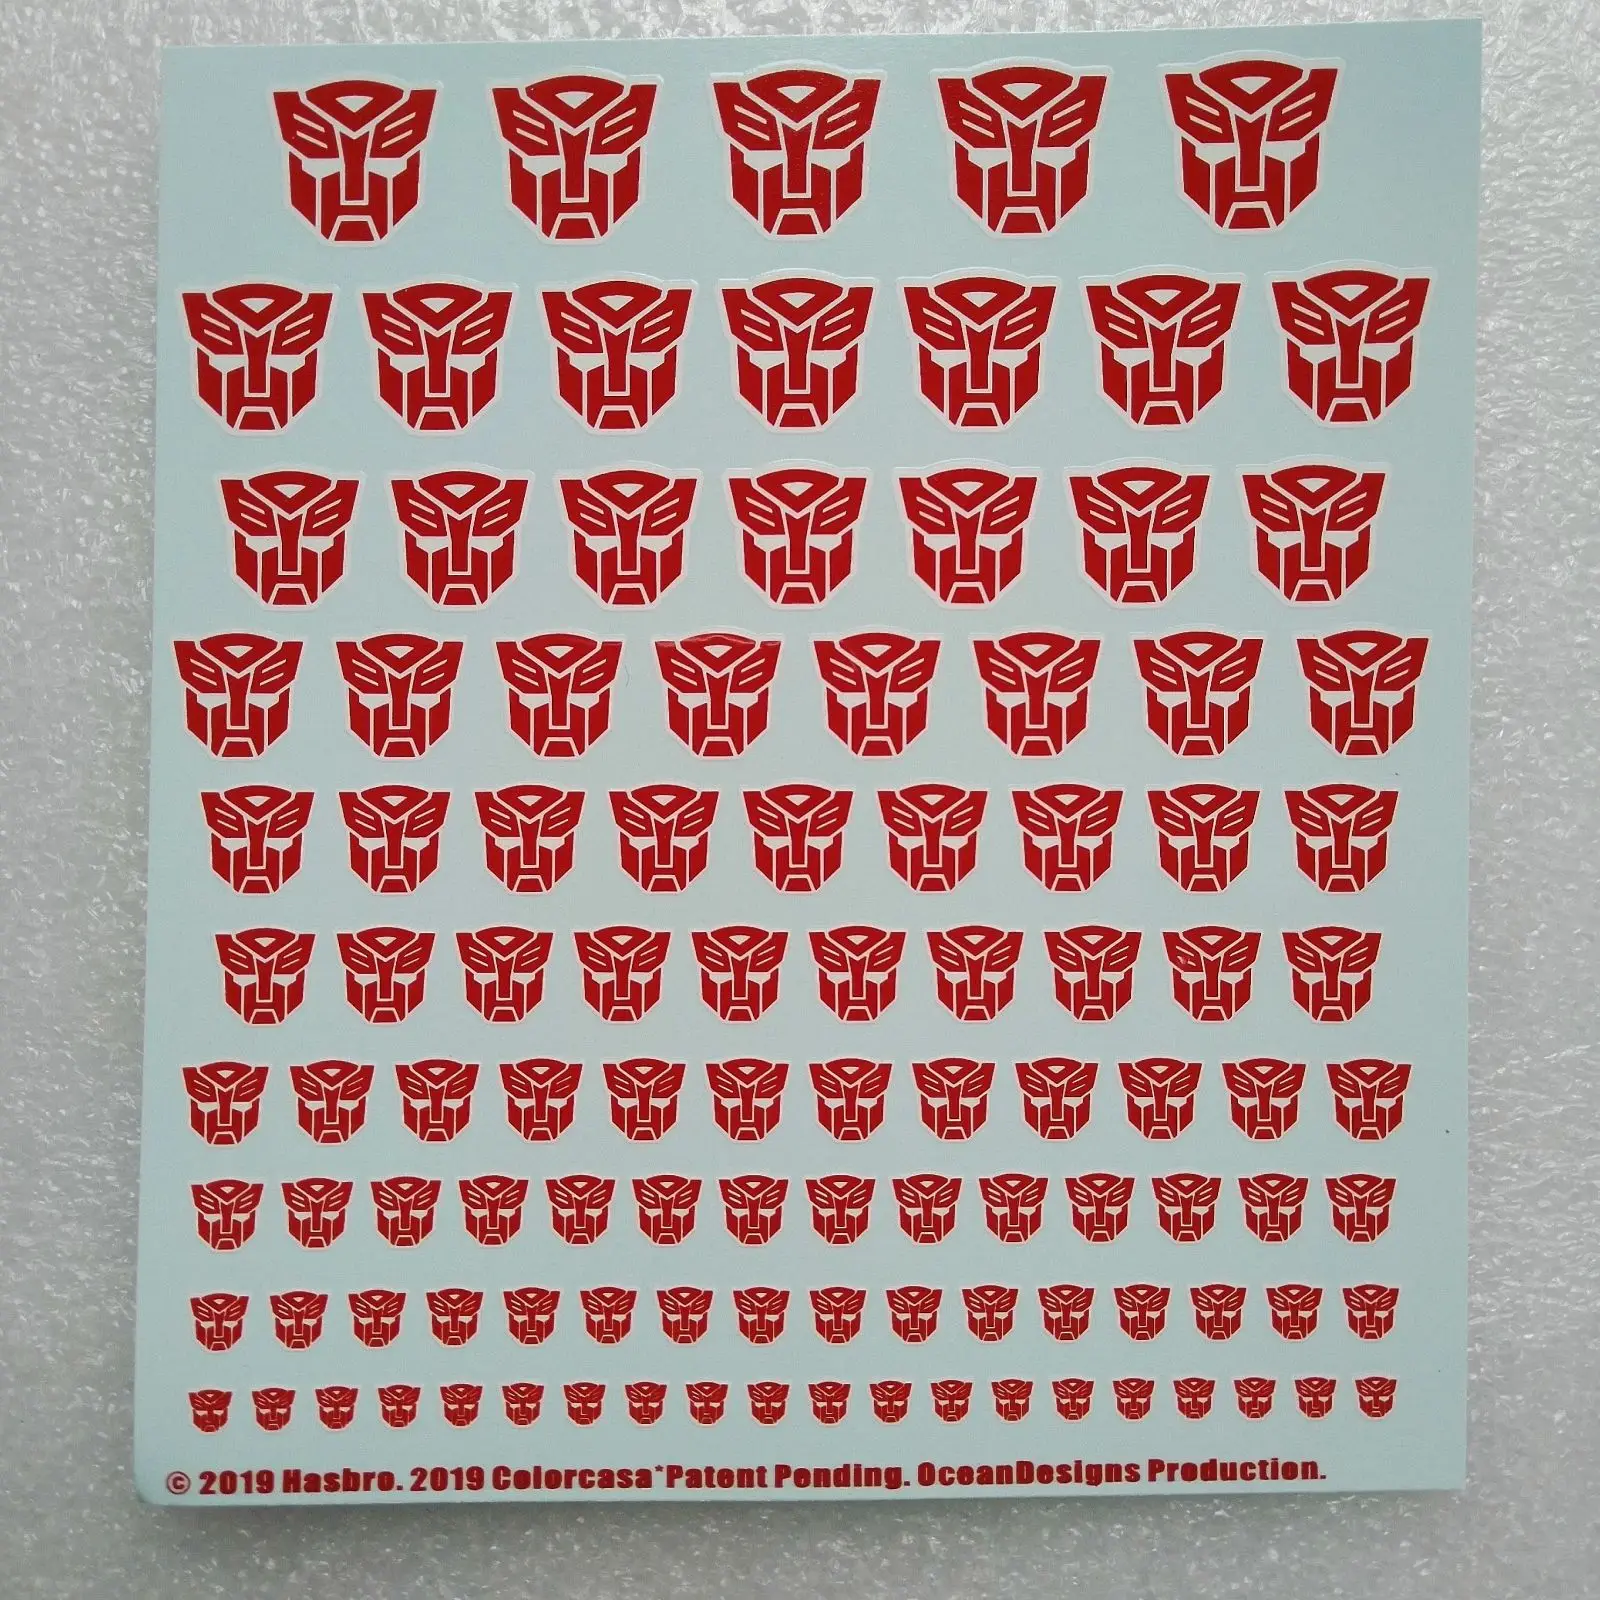 Transformer and Decepticons logos Decals Waterslide Decals Various Sizes 